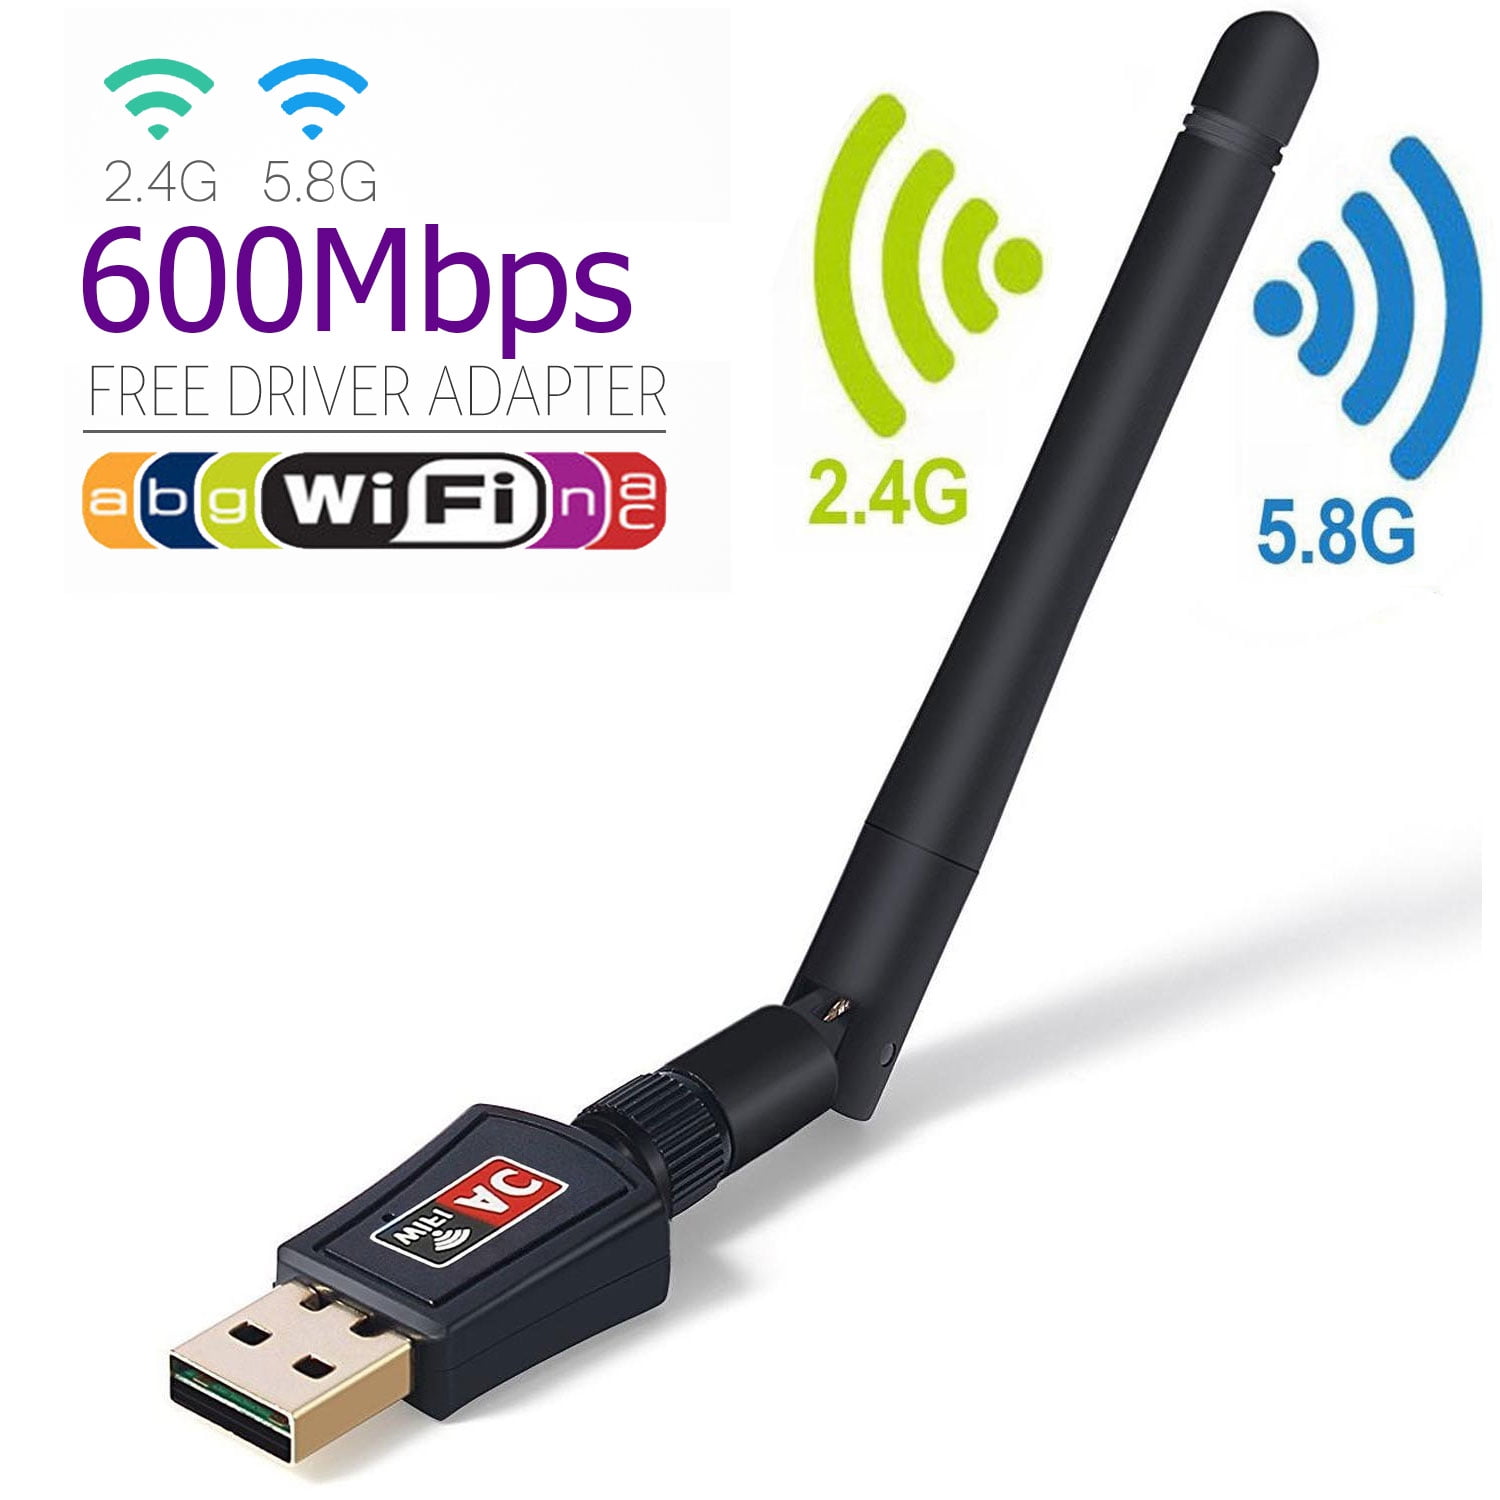 WAVLINK USB WiFi Adapter 1900Mbps Dual Band USB 3.0 WiFi Dongle,Wireless Network Adapter with High Gain Antenna and Cradle Included for Windows Vista /7/8/8.1/10 Mac OS 10.4-10.14 